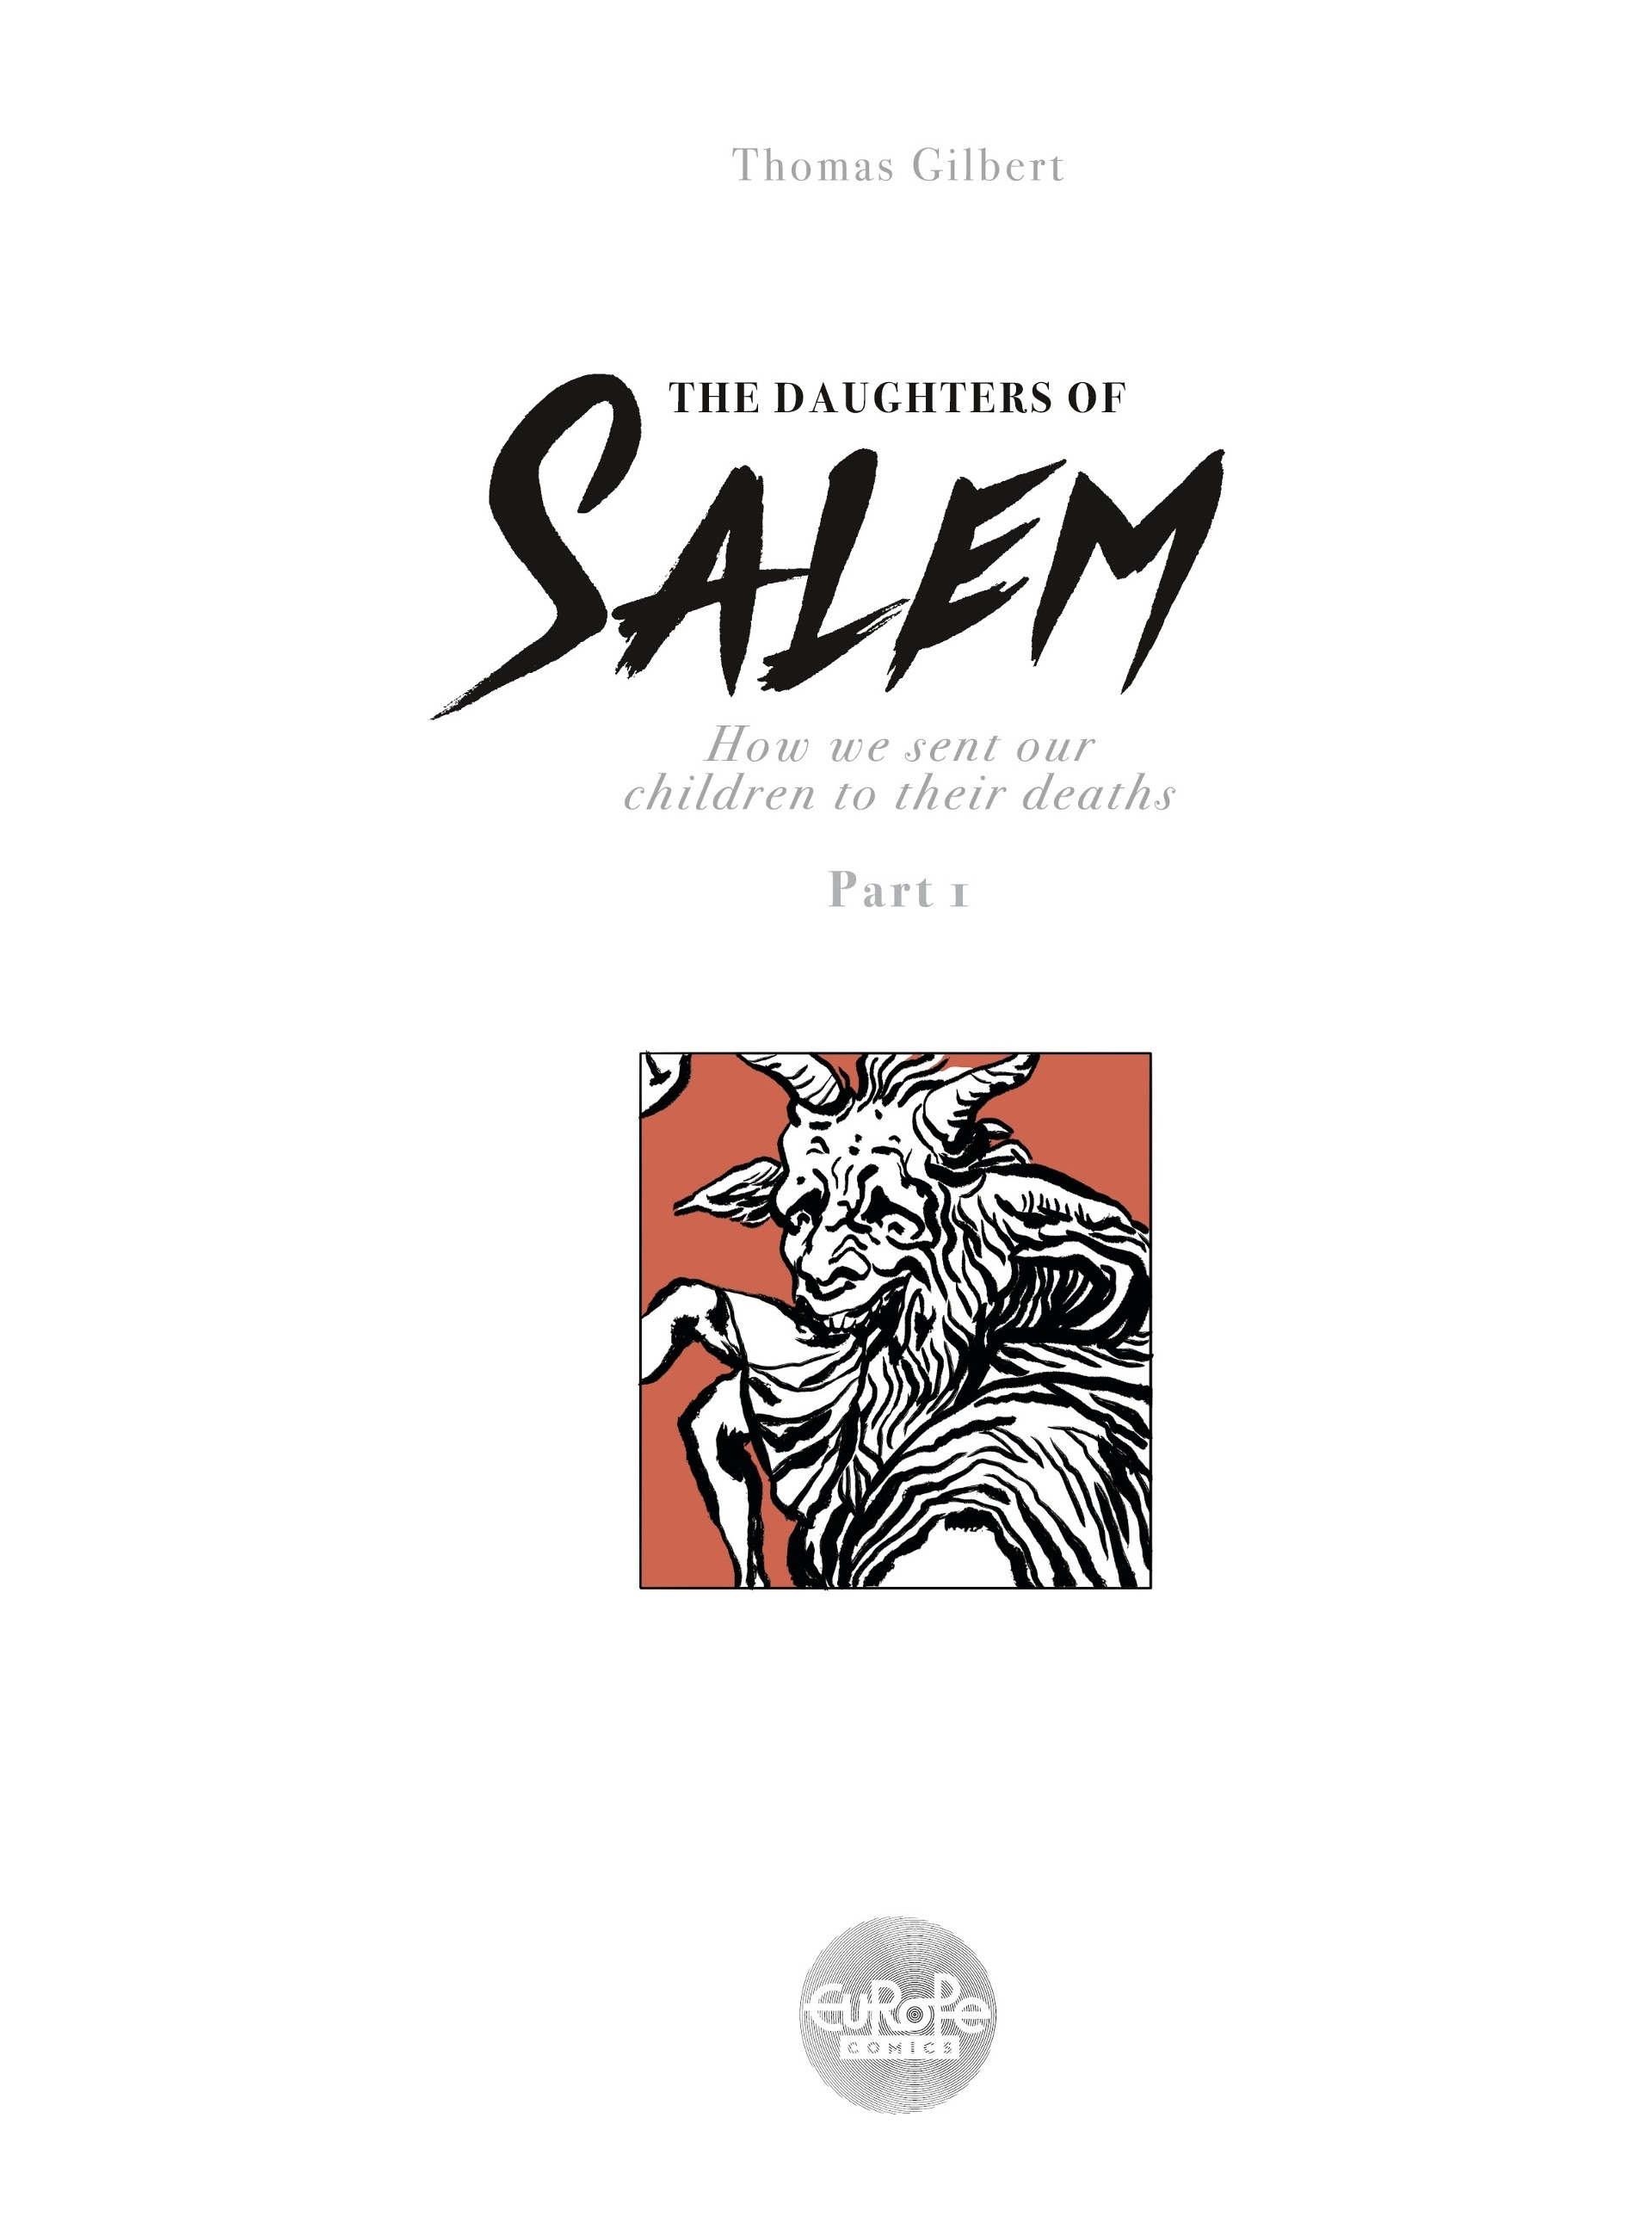 Read online The Daughters of Salem comic -  Issue # TPB 1 - 3